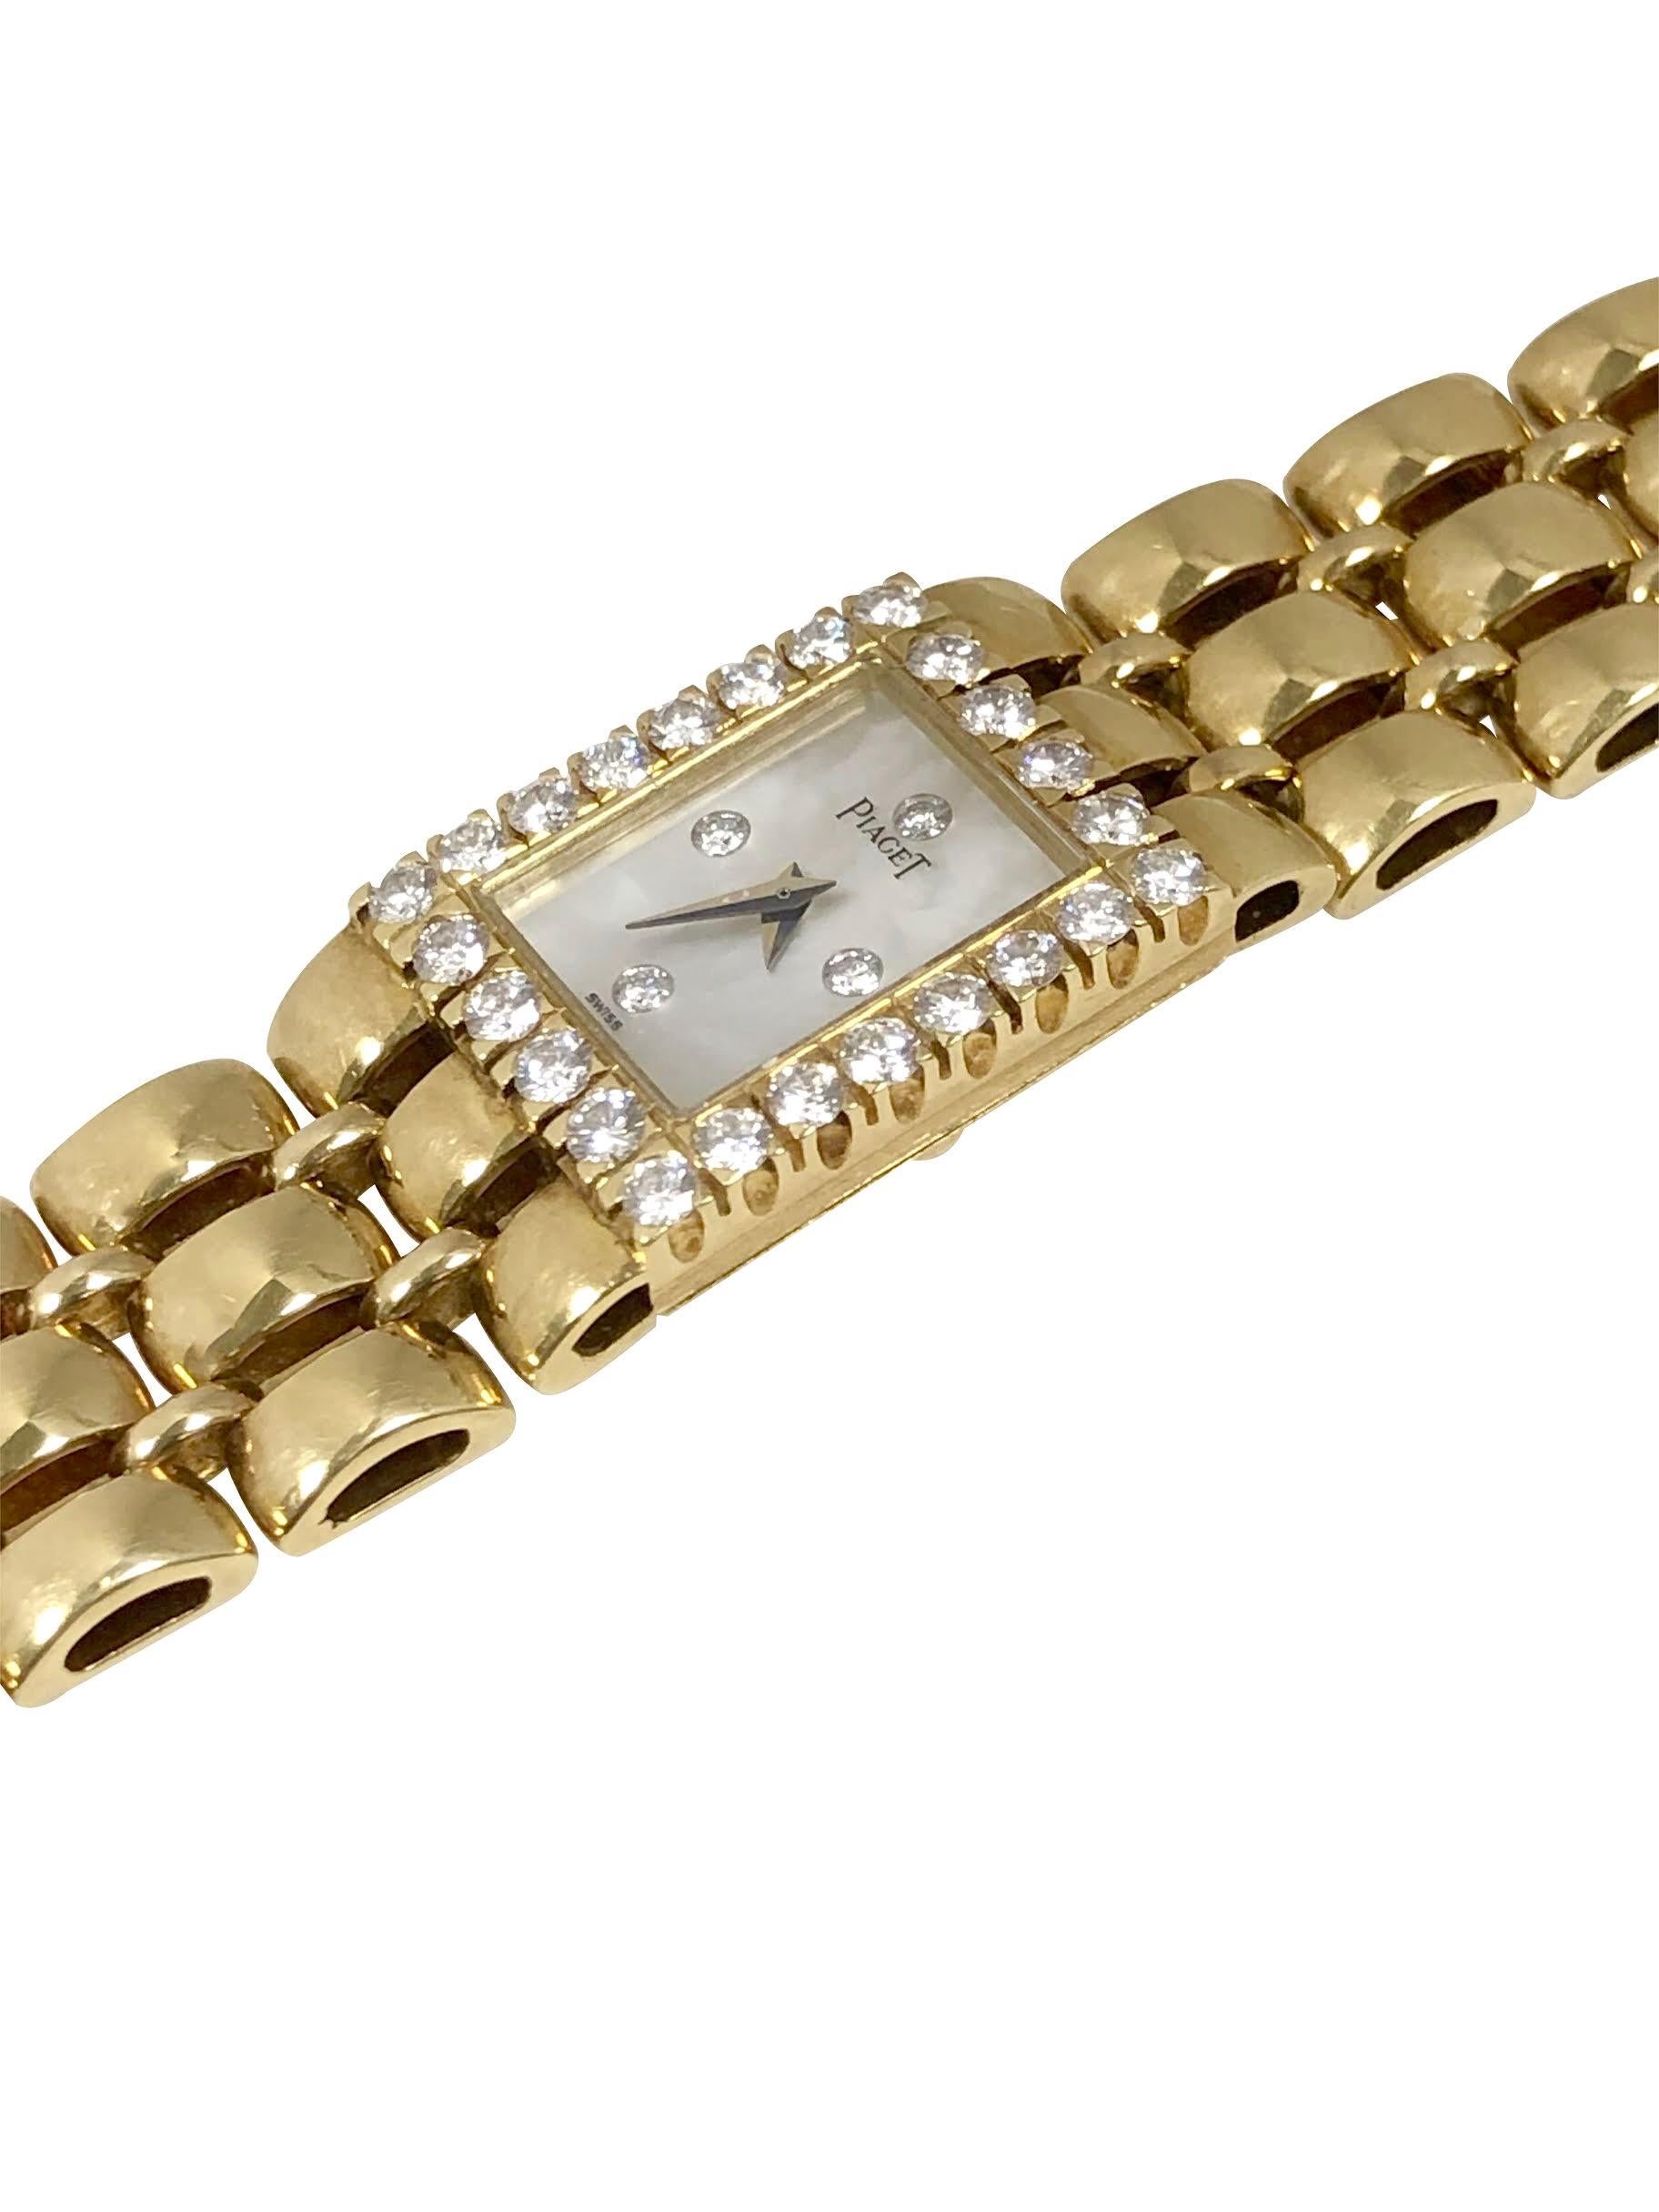 Circa 1990 Piaget Ladies Wrist Watch 18 X 14 M.M. 2 piece case, with a Bezel of fine White Round brilliant cut Diamonds totaling 1 Carat. Quartz Movement with Back set feature, Mother of Pearl Dial with Diamond set markers. 1/2 inch wide oval link